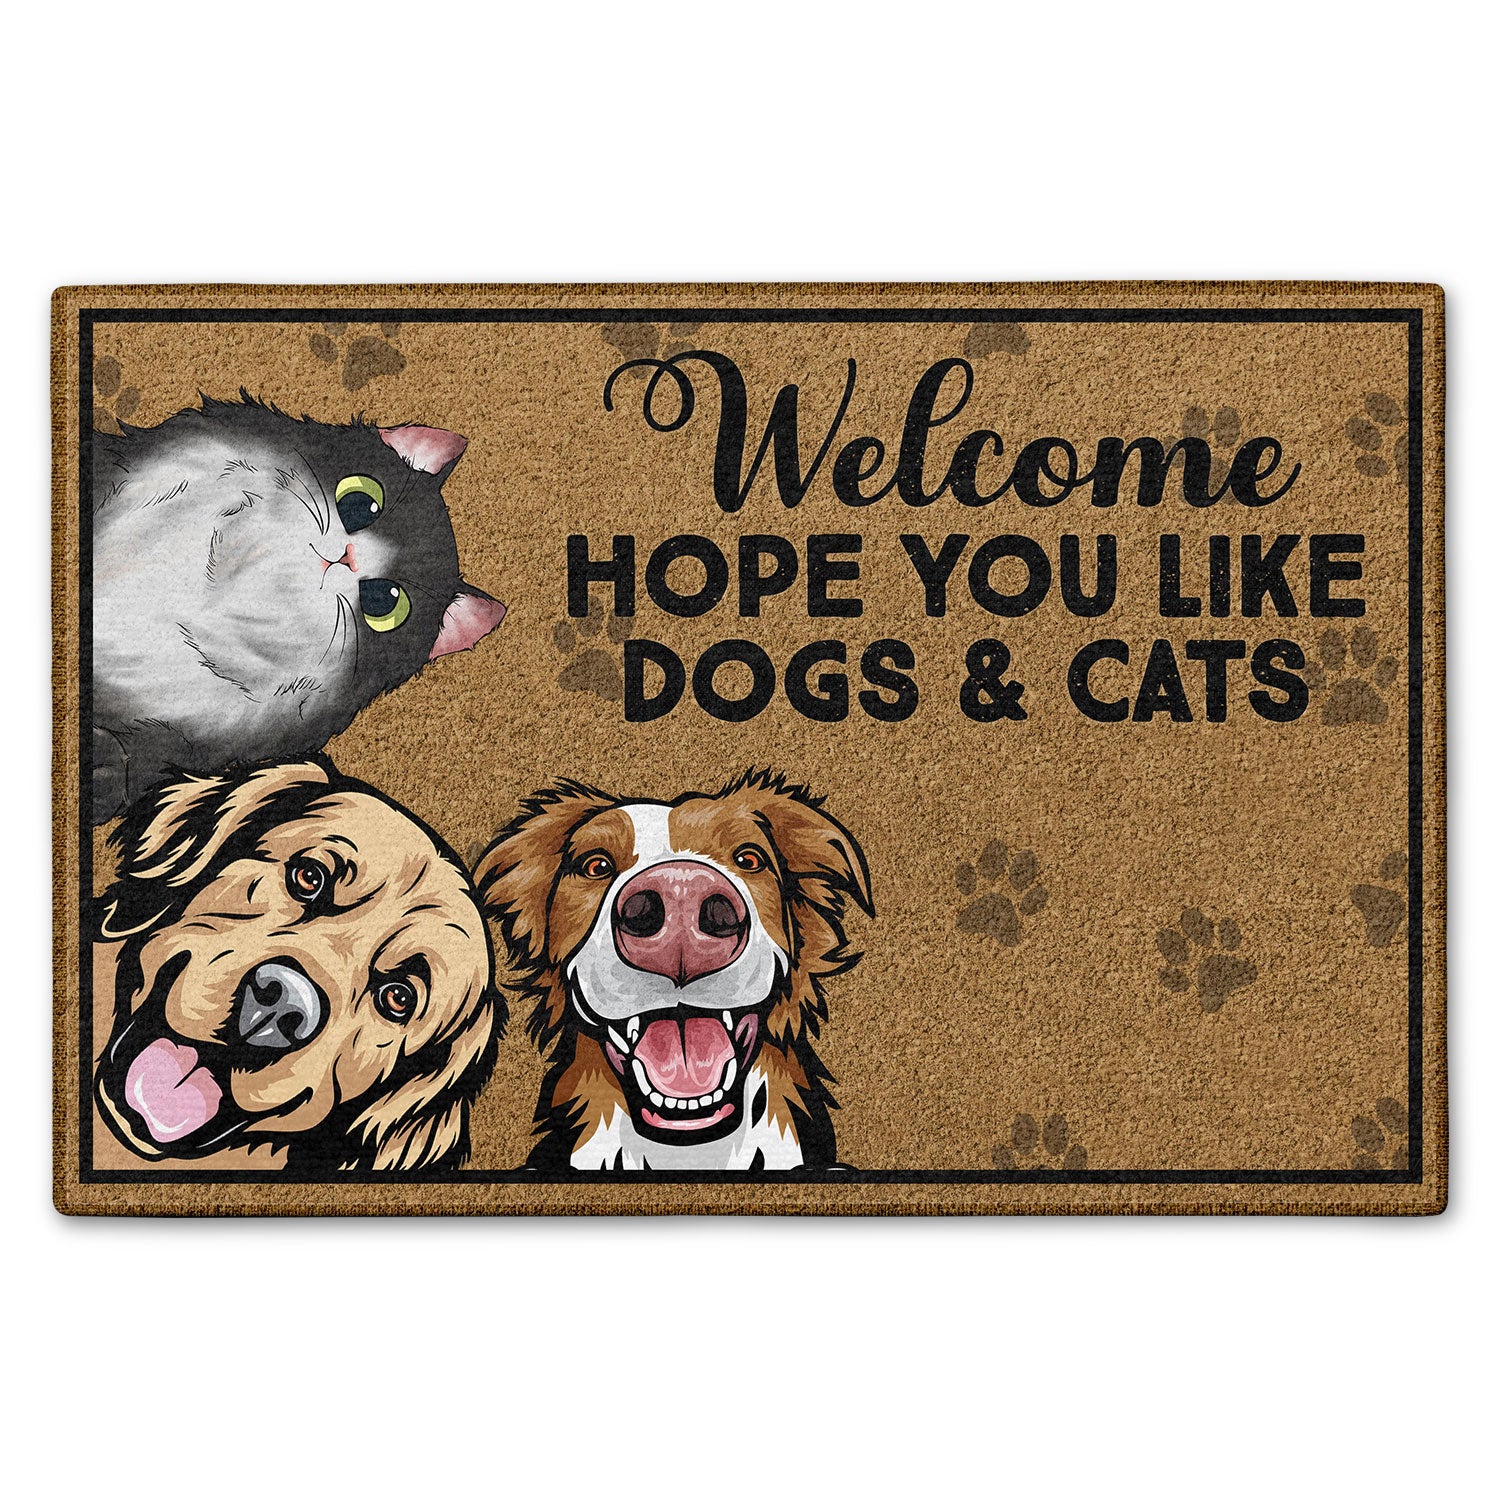 Welcome Hope You Like Dogs - Home Decor, Birthday, Housewarming Gift For Dog Lovers & Cat Lovers - Personalized Custom Doormat